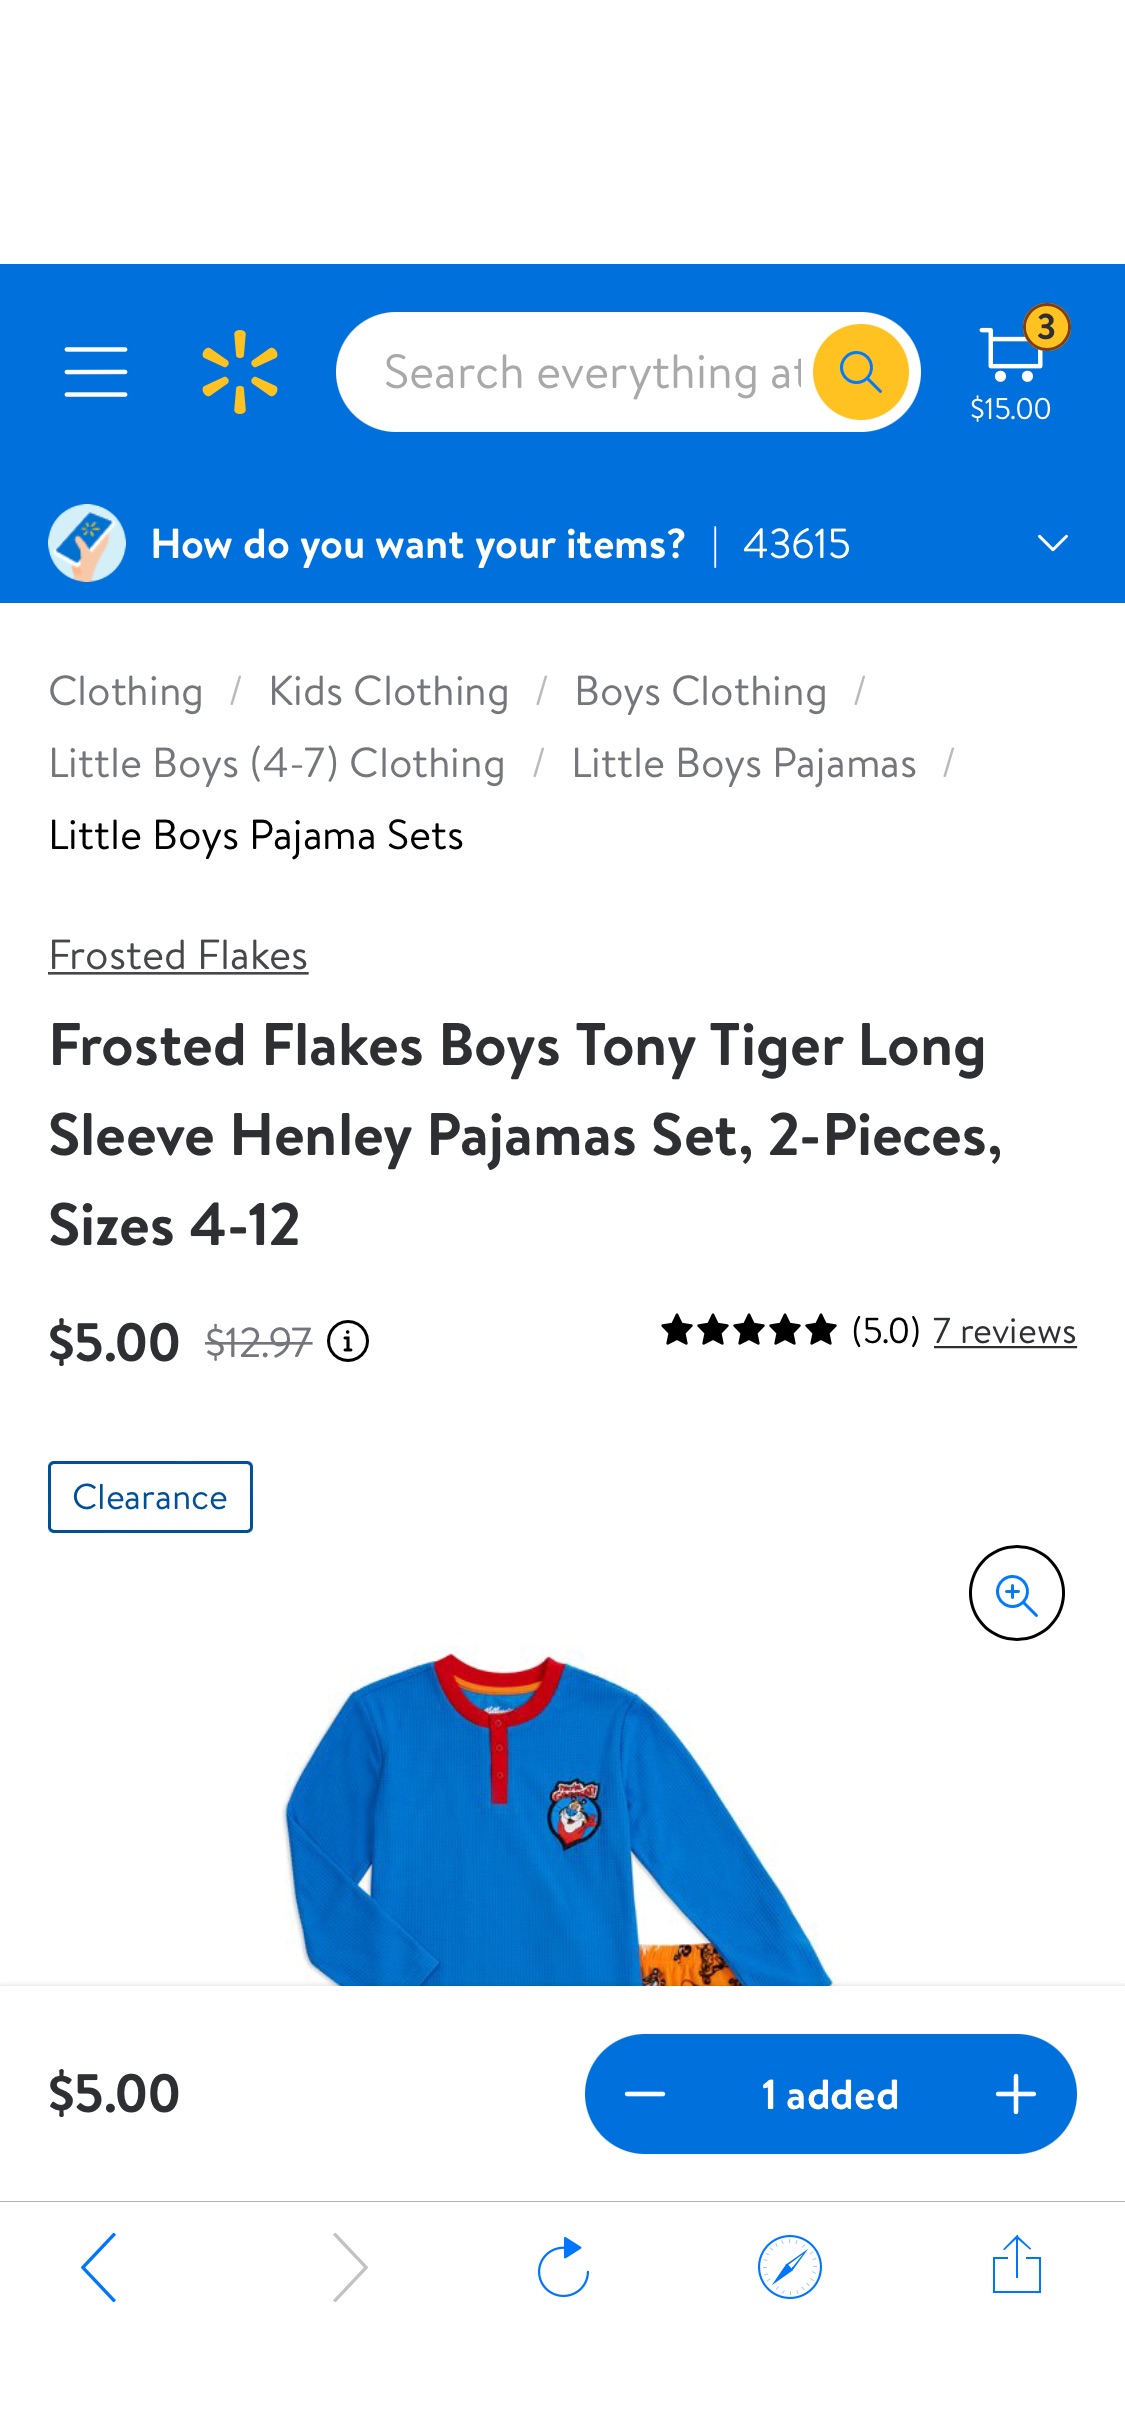 Frosted Flakes 男孩 Tony Tiger Long Sleeve Henley Pajamas Set, 2-Pieces, Sizes 4-12 - Walmart.com